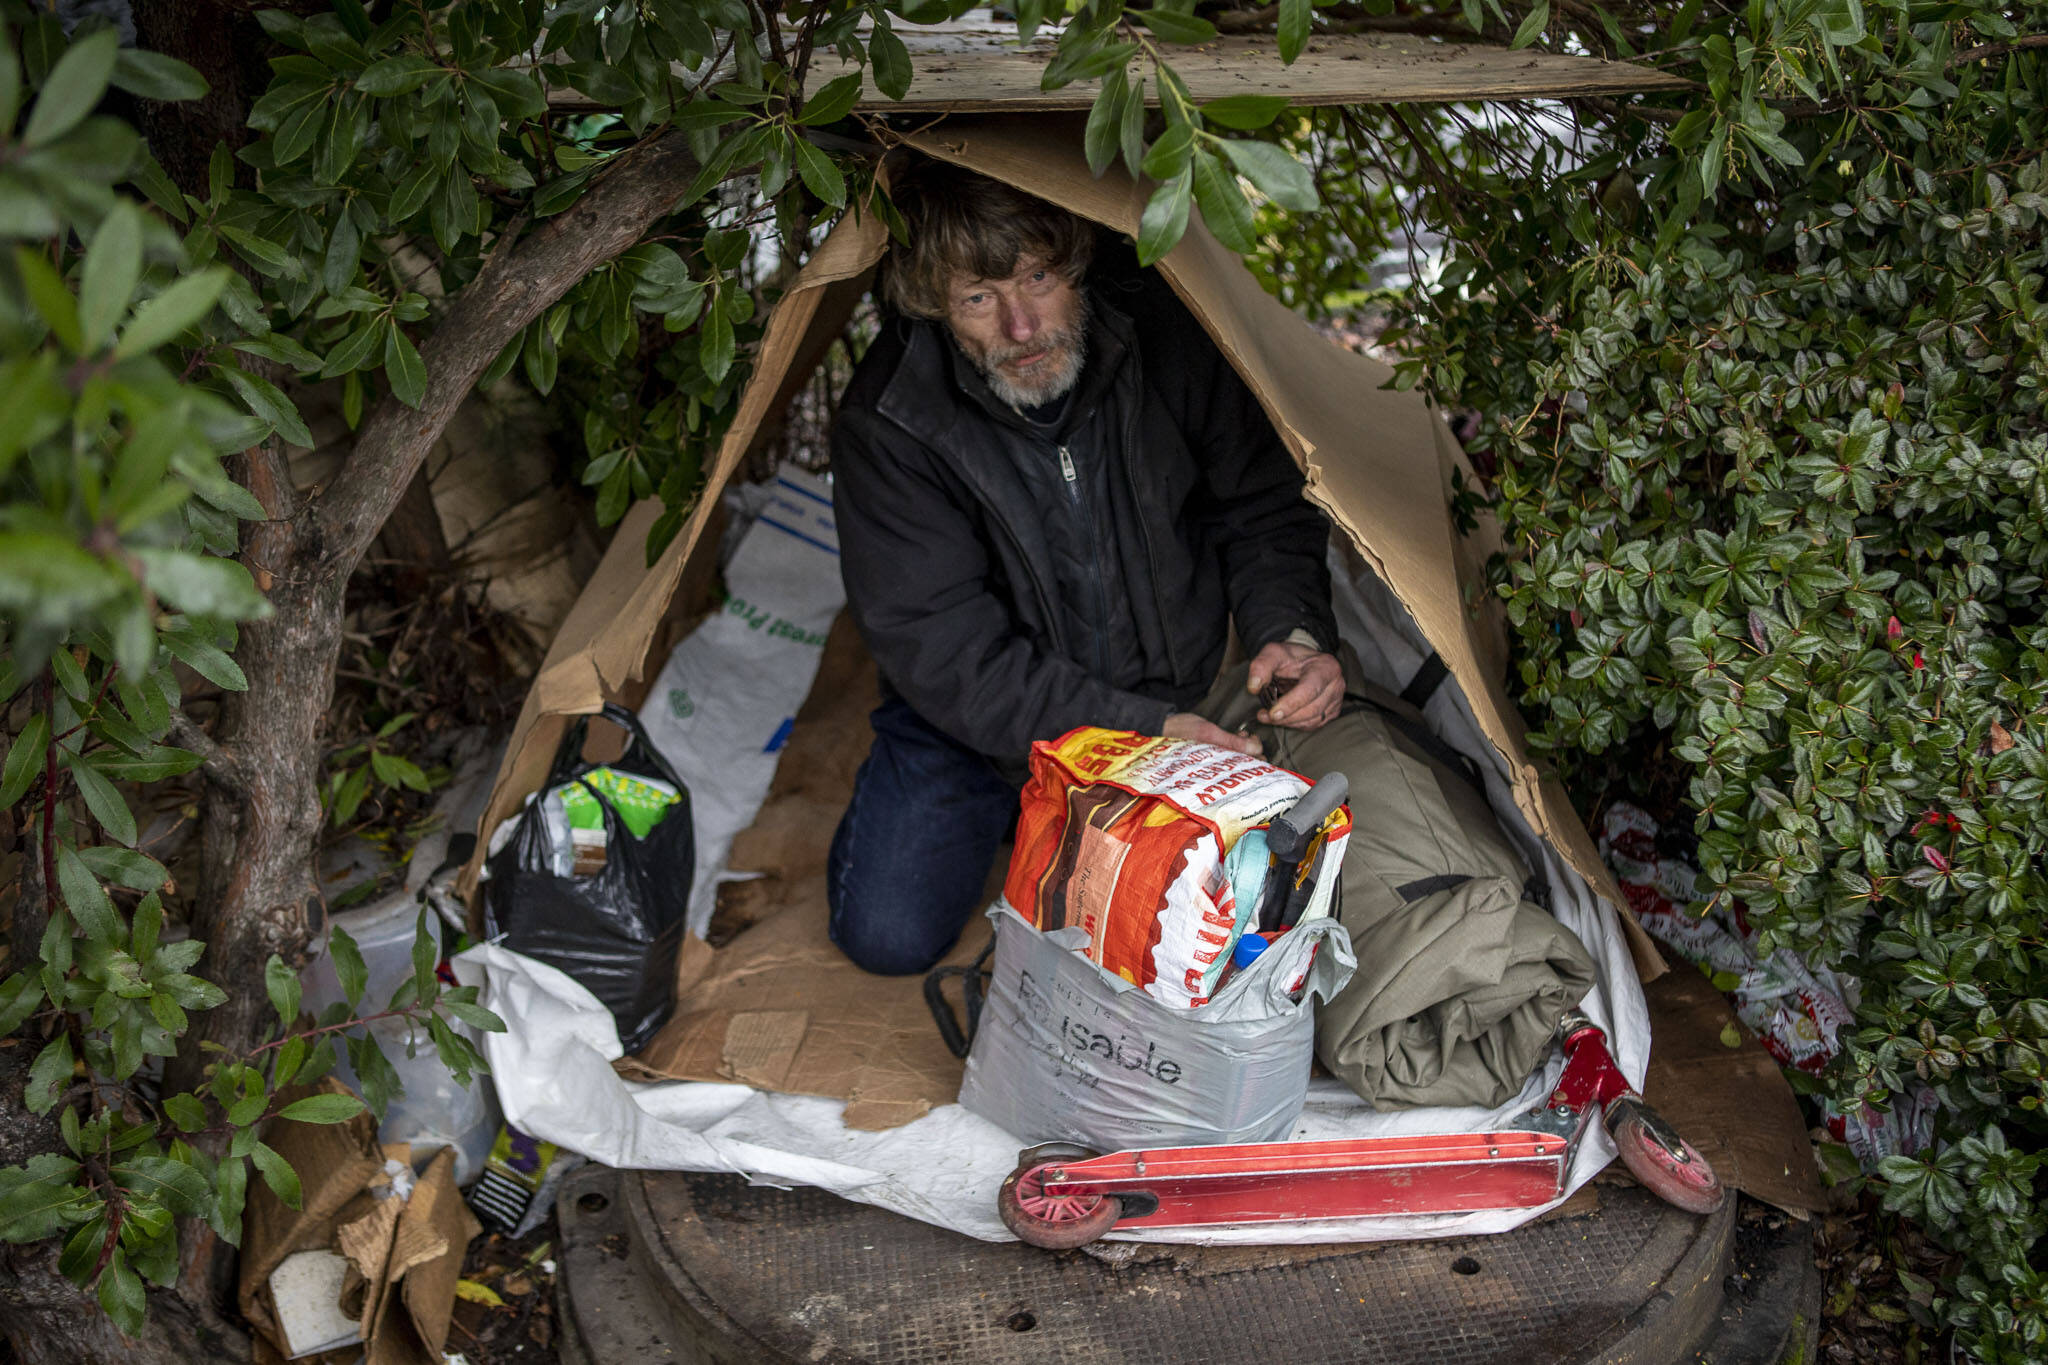 Mel Jennings sits in his structure during a point-in-time count of people facing homelessness on Tuesday, in Everett. Mel has had a brain and spinal surgery, and currently has been homeless for a year. (Annie Barker / The Herald)